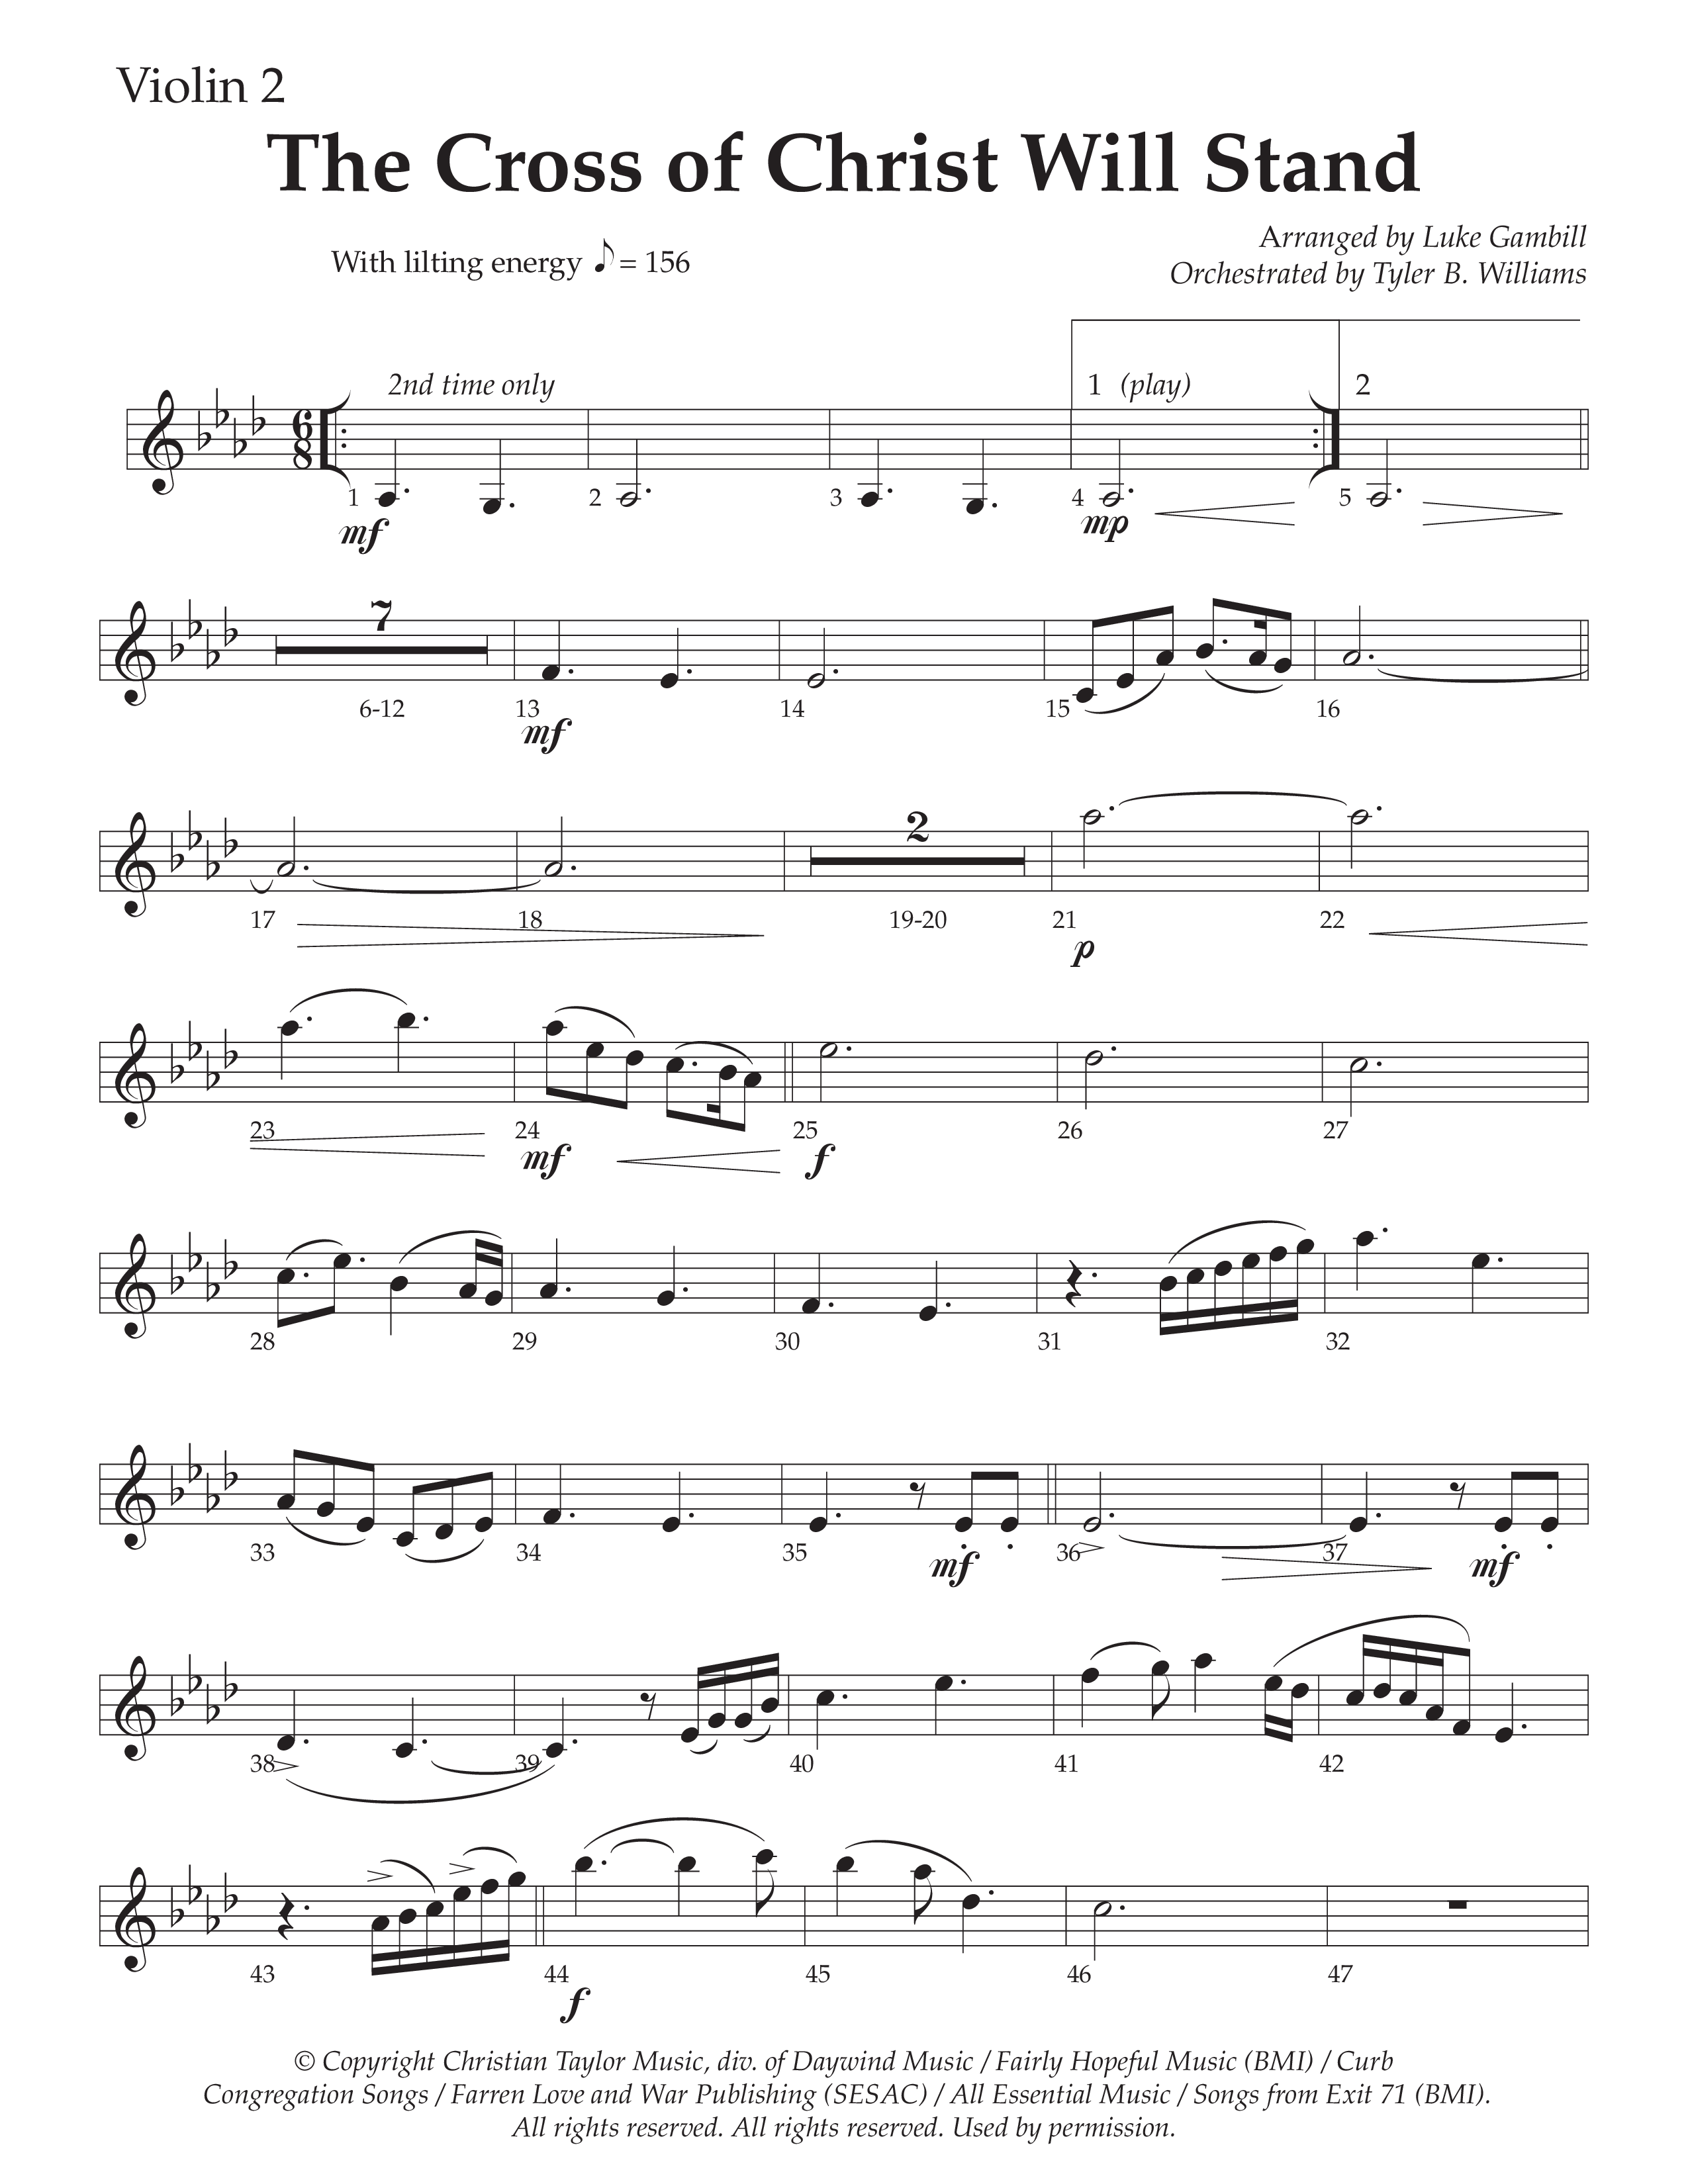 The Cross of Christ Will Stand (Choral Anthem SATB) Violin 2 (Daywind Worship / Arr. Luke Gambill)